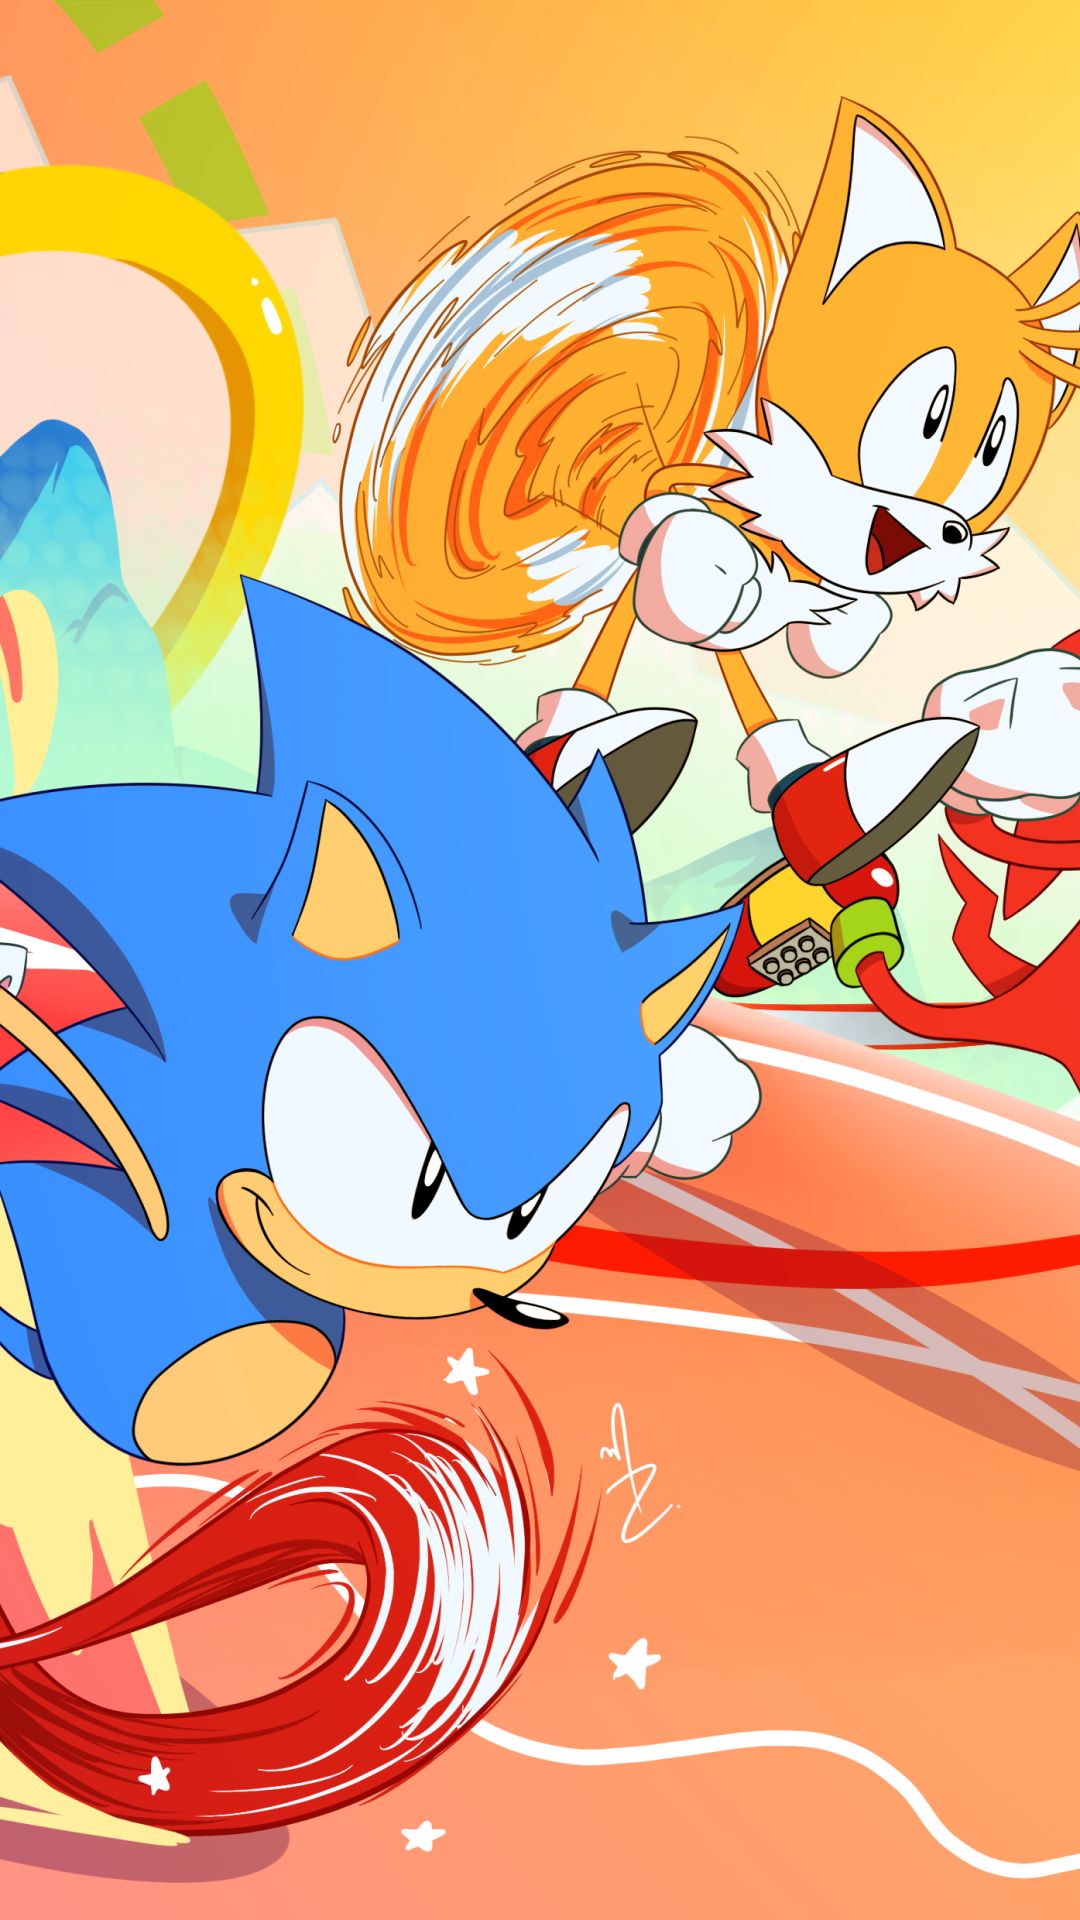 sonic mania, sonic the hedgehog, video game, knuckles the echidna, miles 'tails' prower, sonic